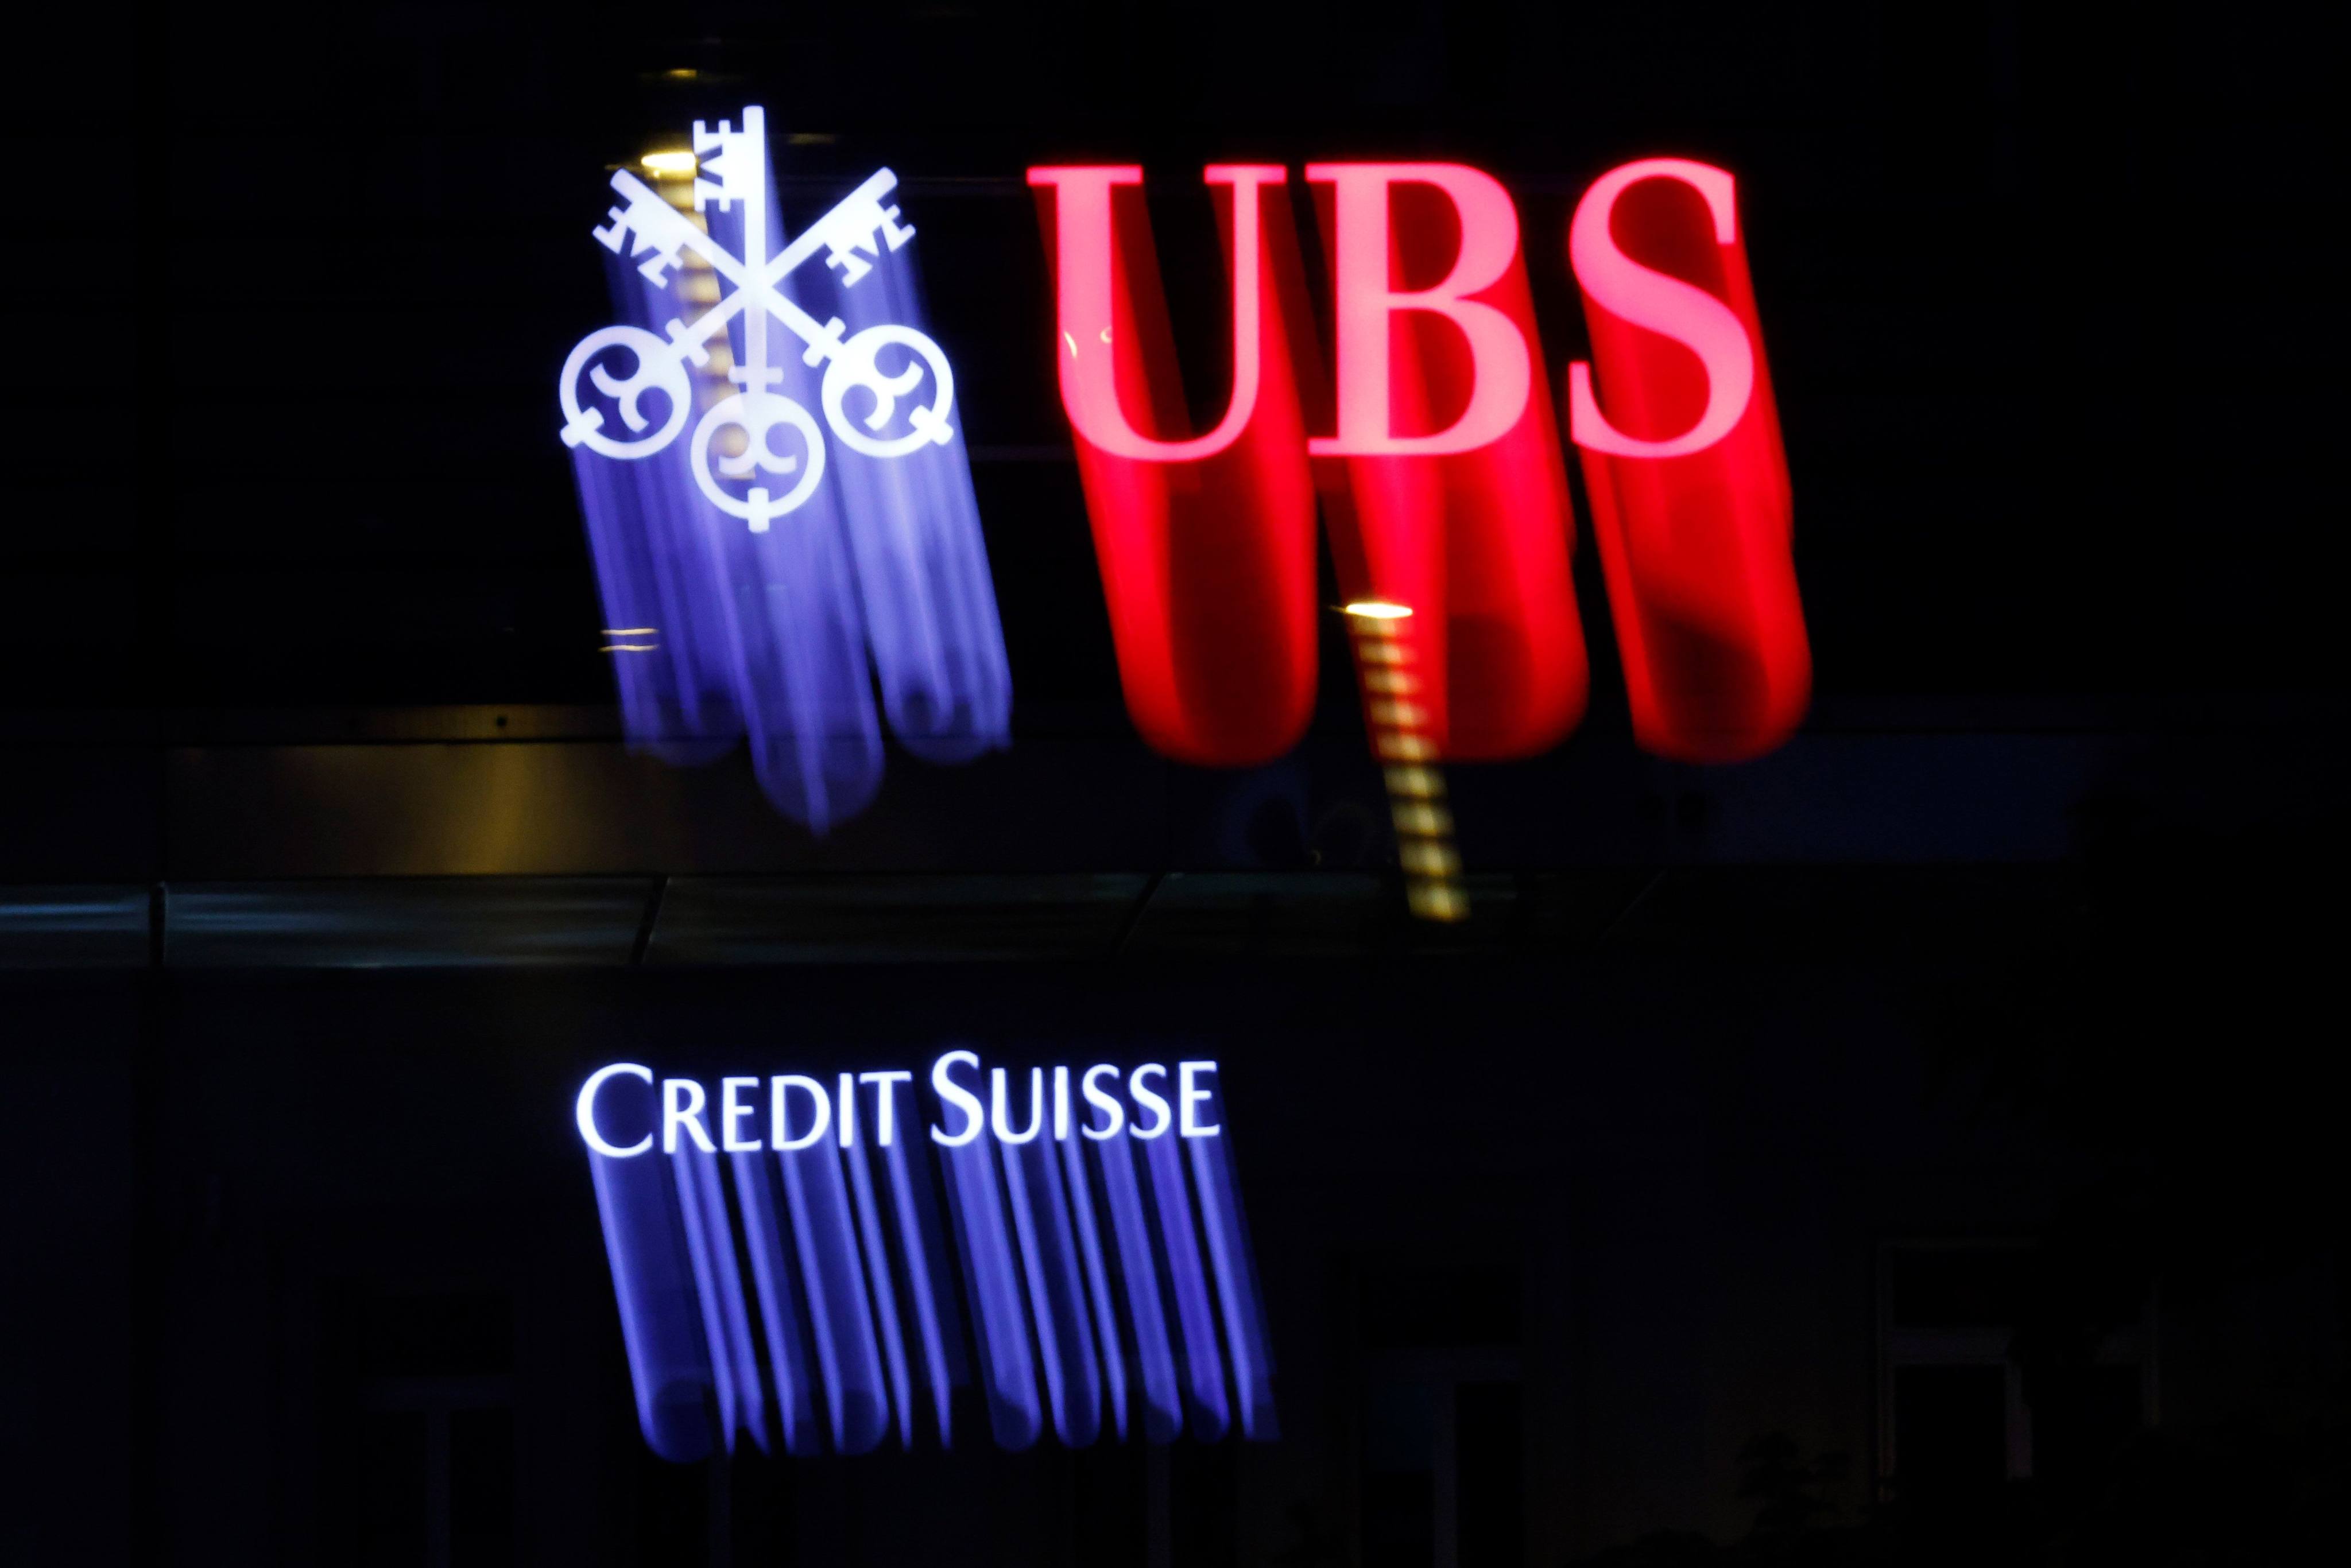 The logo of a Credit Suisse and UBS are seen in Zurich, Switzerland. Photo: Bloomberg